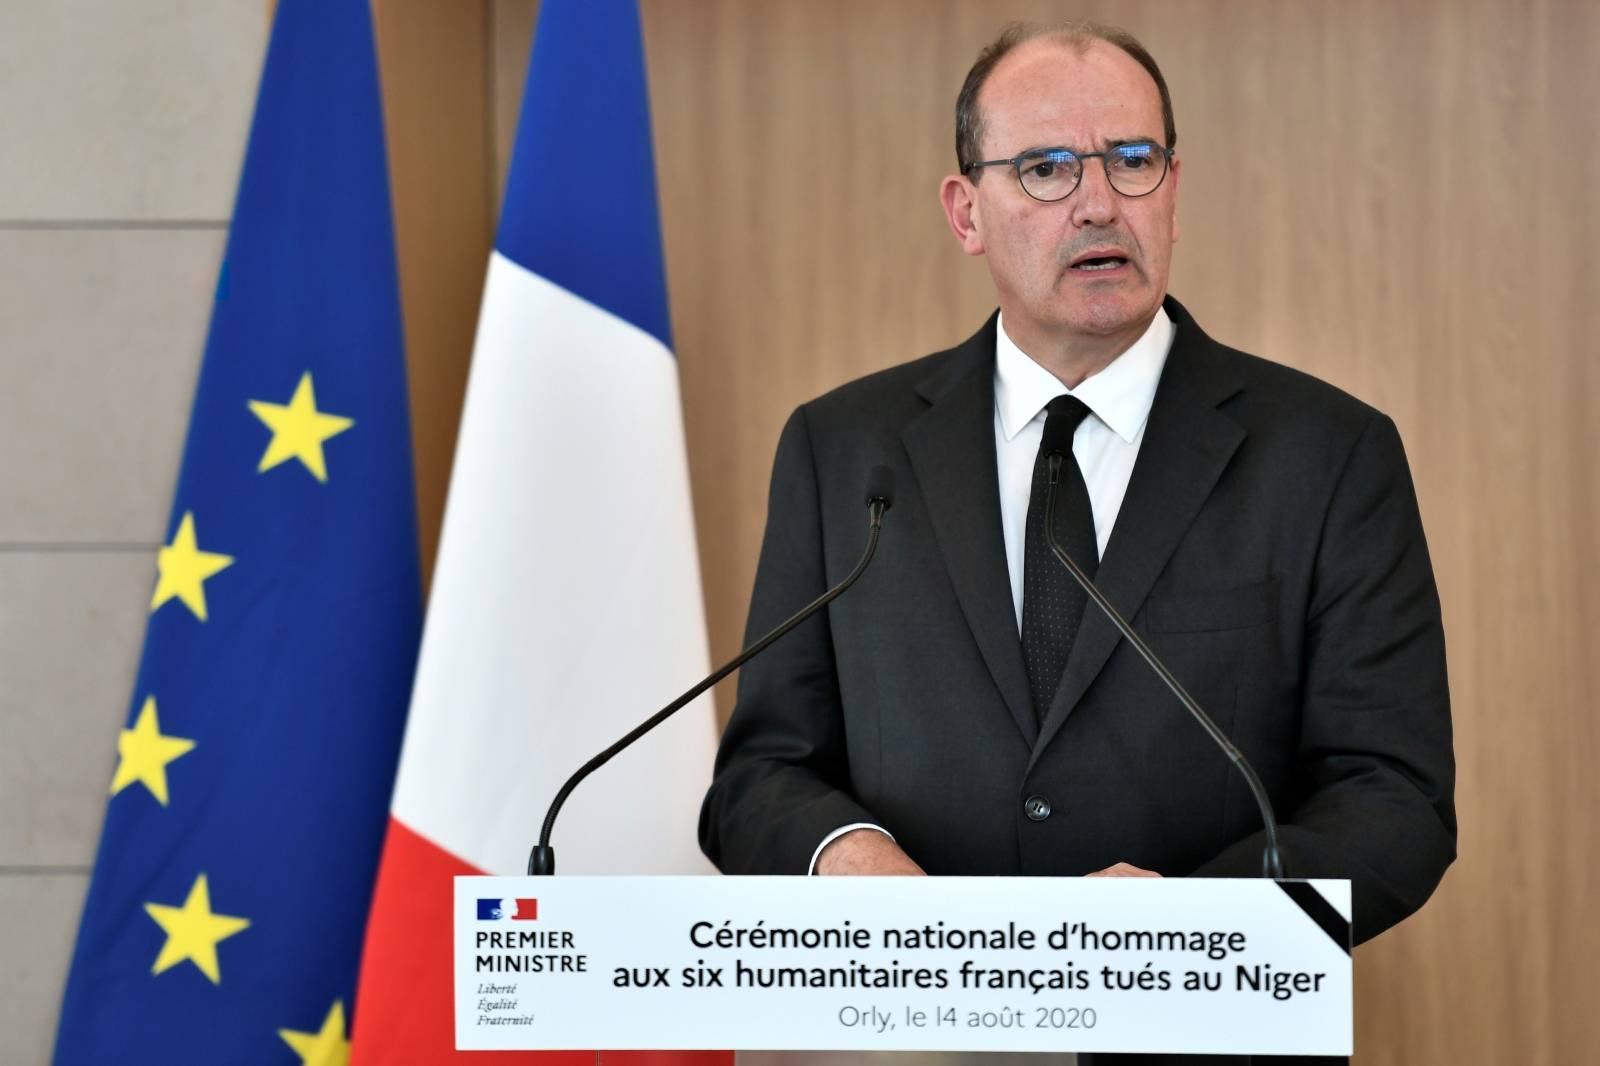 French PM Castex attends a ceremony in tribute to six humanitarian aid workers, in Orly